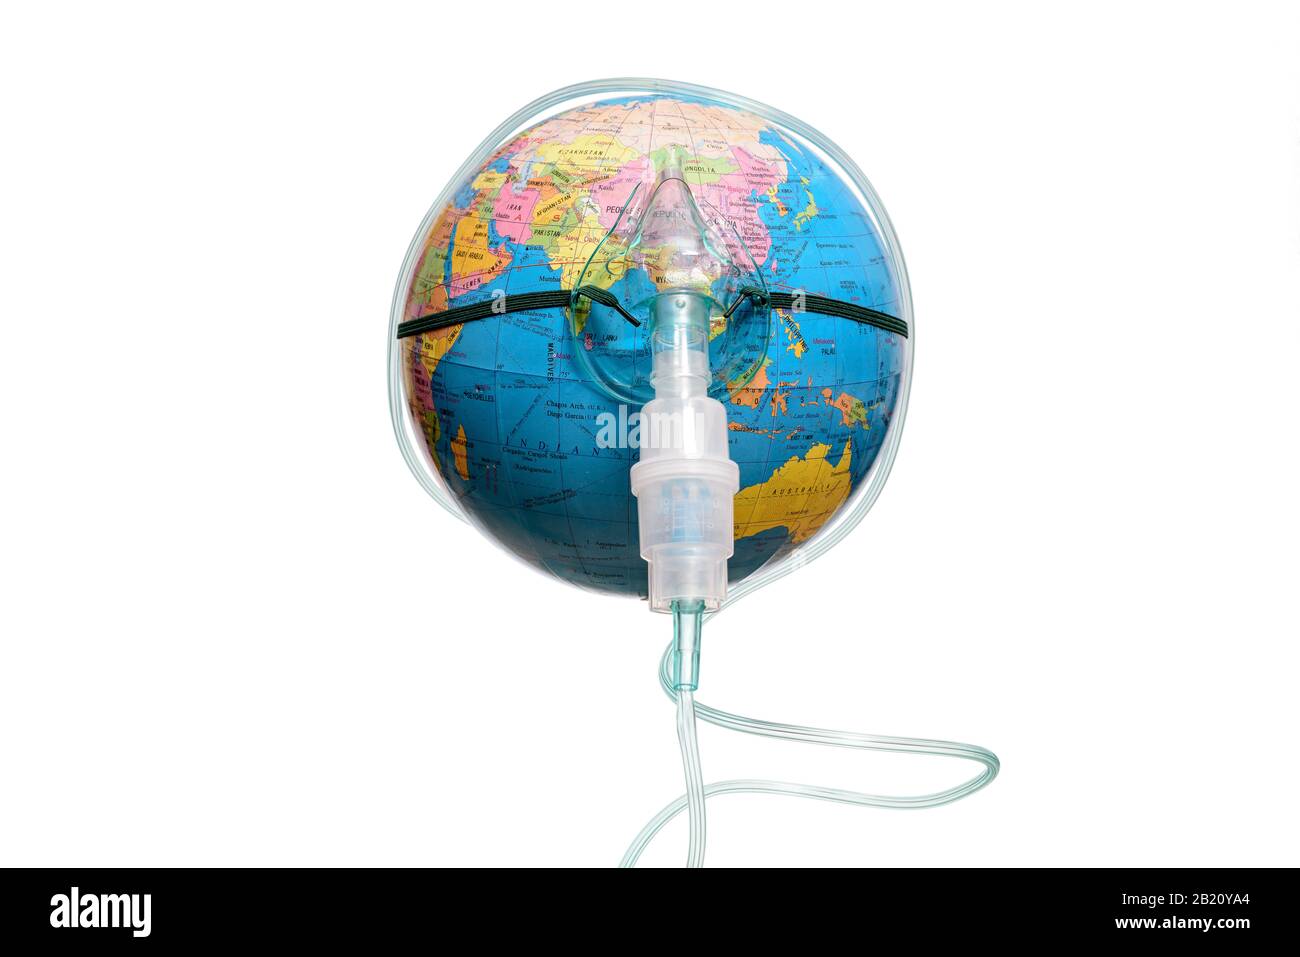 Save The World. Conceptual image, earth globe with an inhaler mask, isolated on a white background. Human Epidemic Danger. Stock Photo